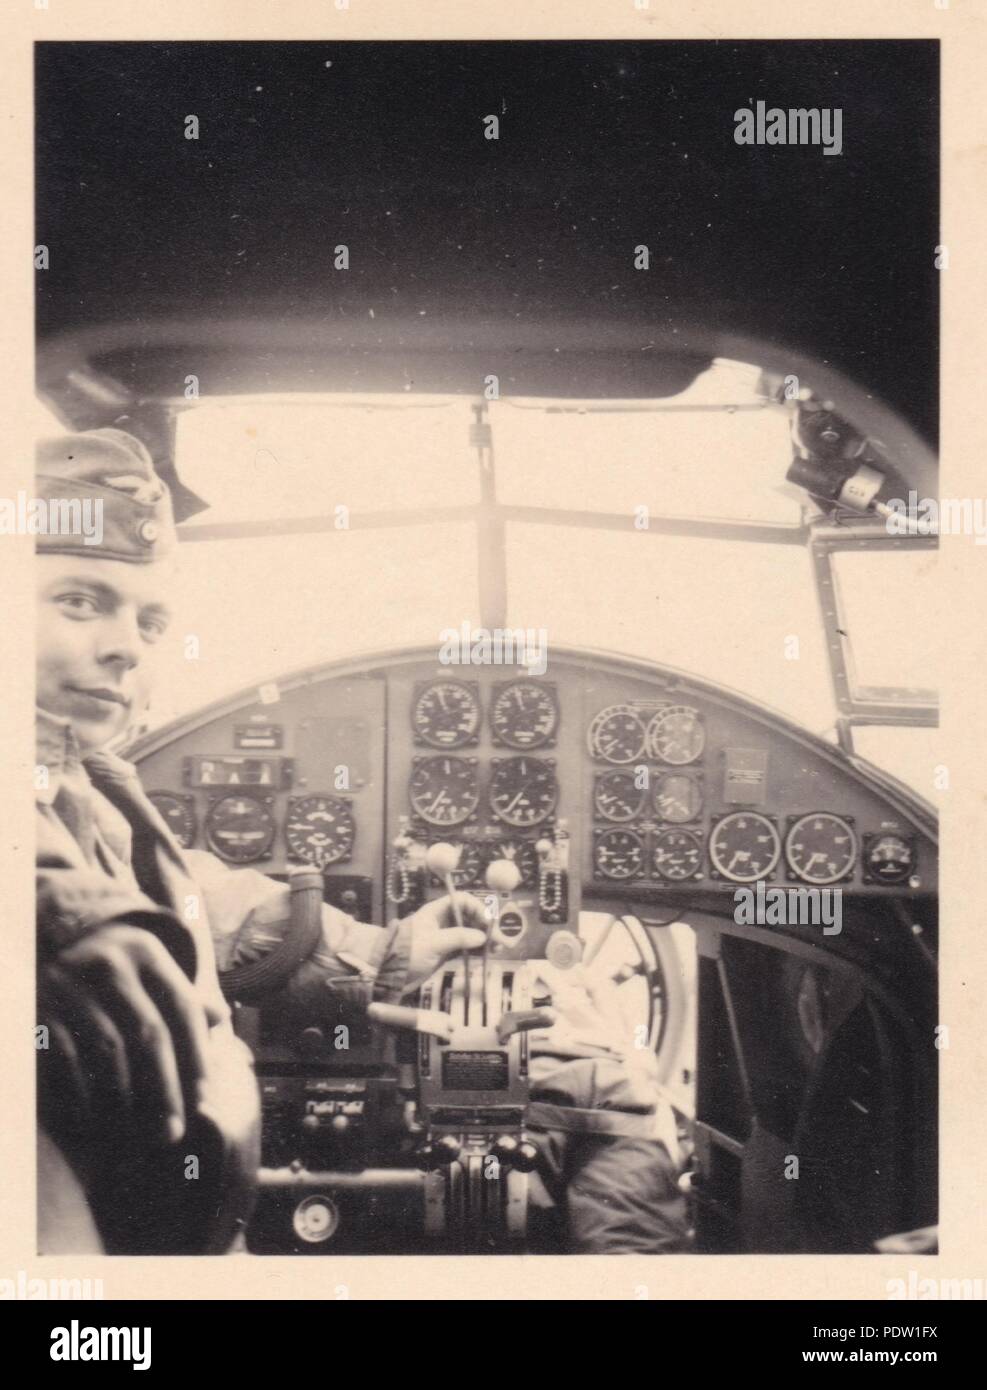 Image from the photo album of Oberfeldwebel Karl Gendner of 1. Staffel, Kampfgeschwader 40: Karl Gendner sits in the Pilot's seat of a Heinkel He 111 E-1, while his Observer, Steiner, poses in the nose of the aircraft in 1938. Stock Photo